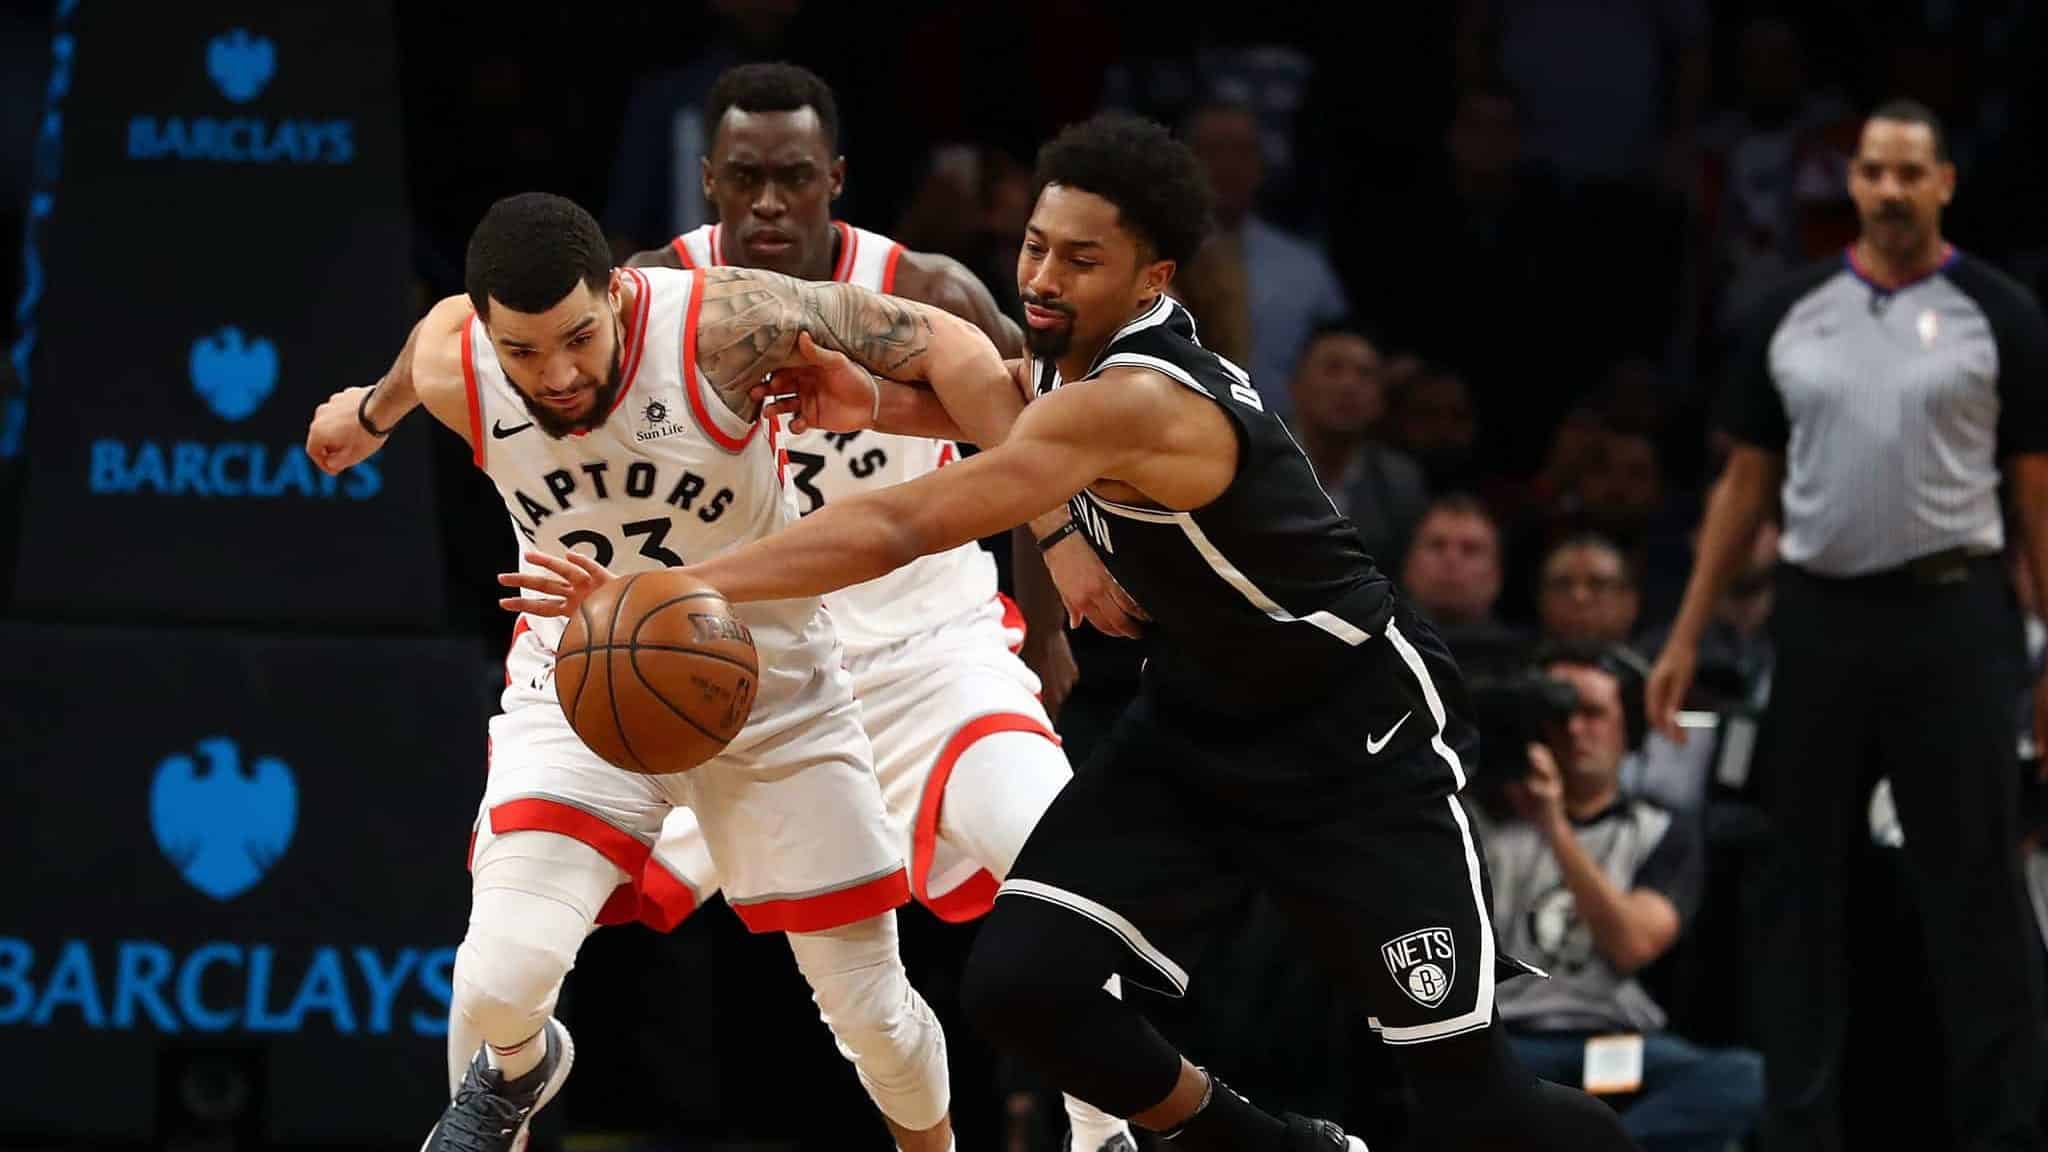 NEW YORK, NY - JANUARY 08: Fred VanVleet #23 of the Toronto Raptors and Spencer Dinwiddie #8 of the Brooklyn Nets battle for the ball during their game at Barclays Center on January 8, 2018 in New York City.